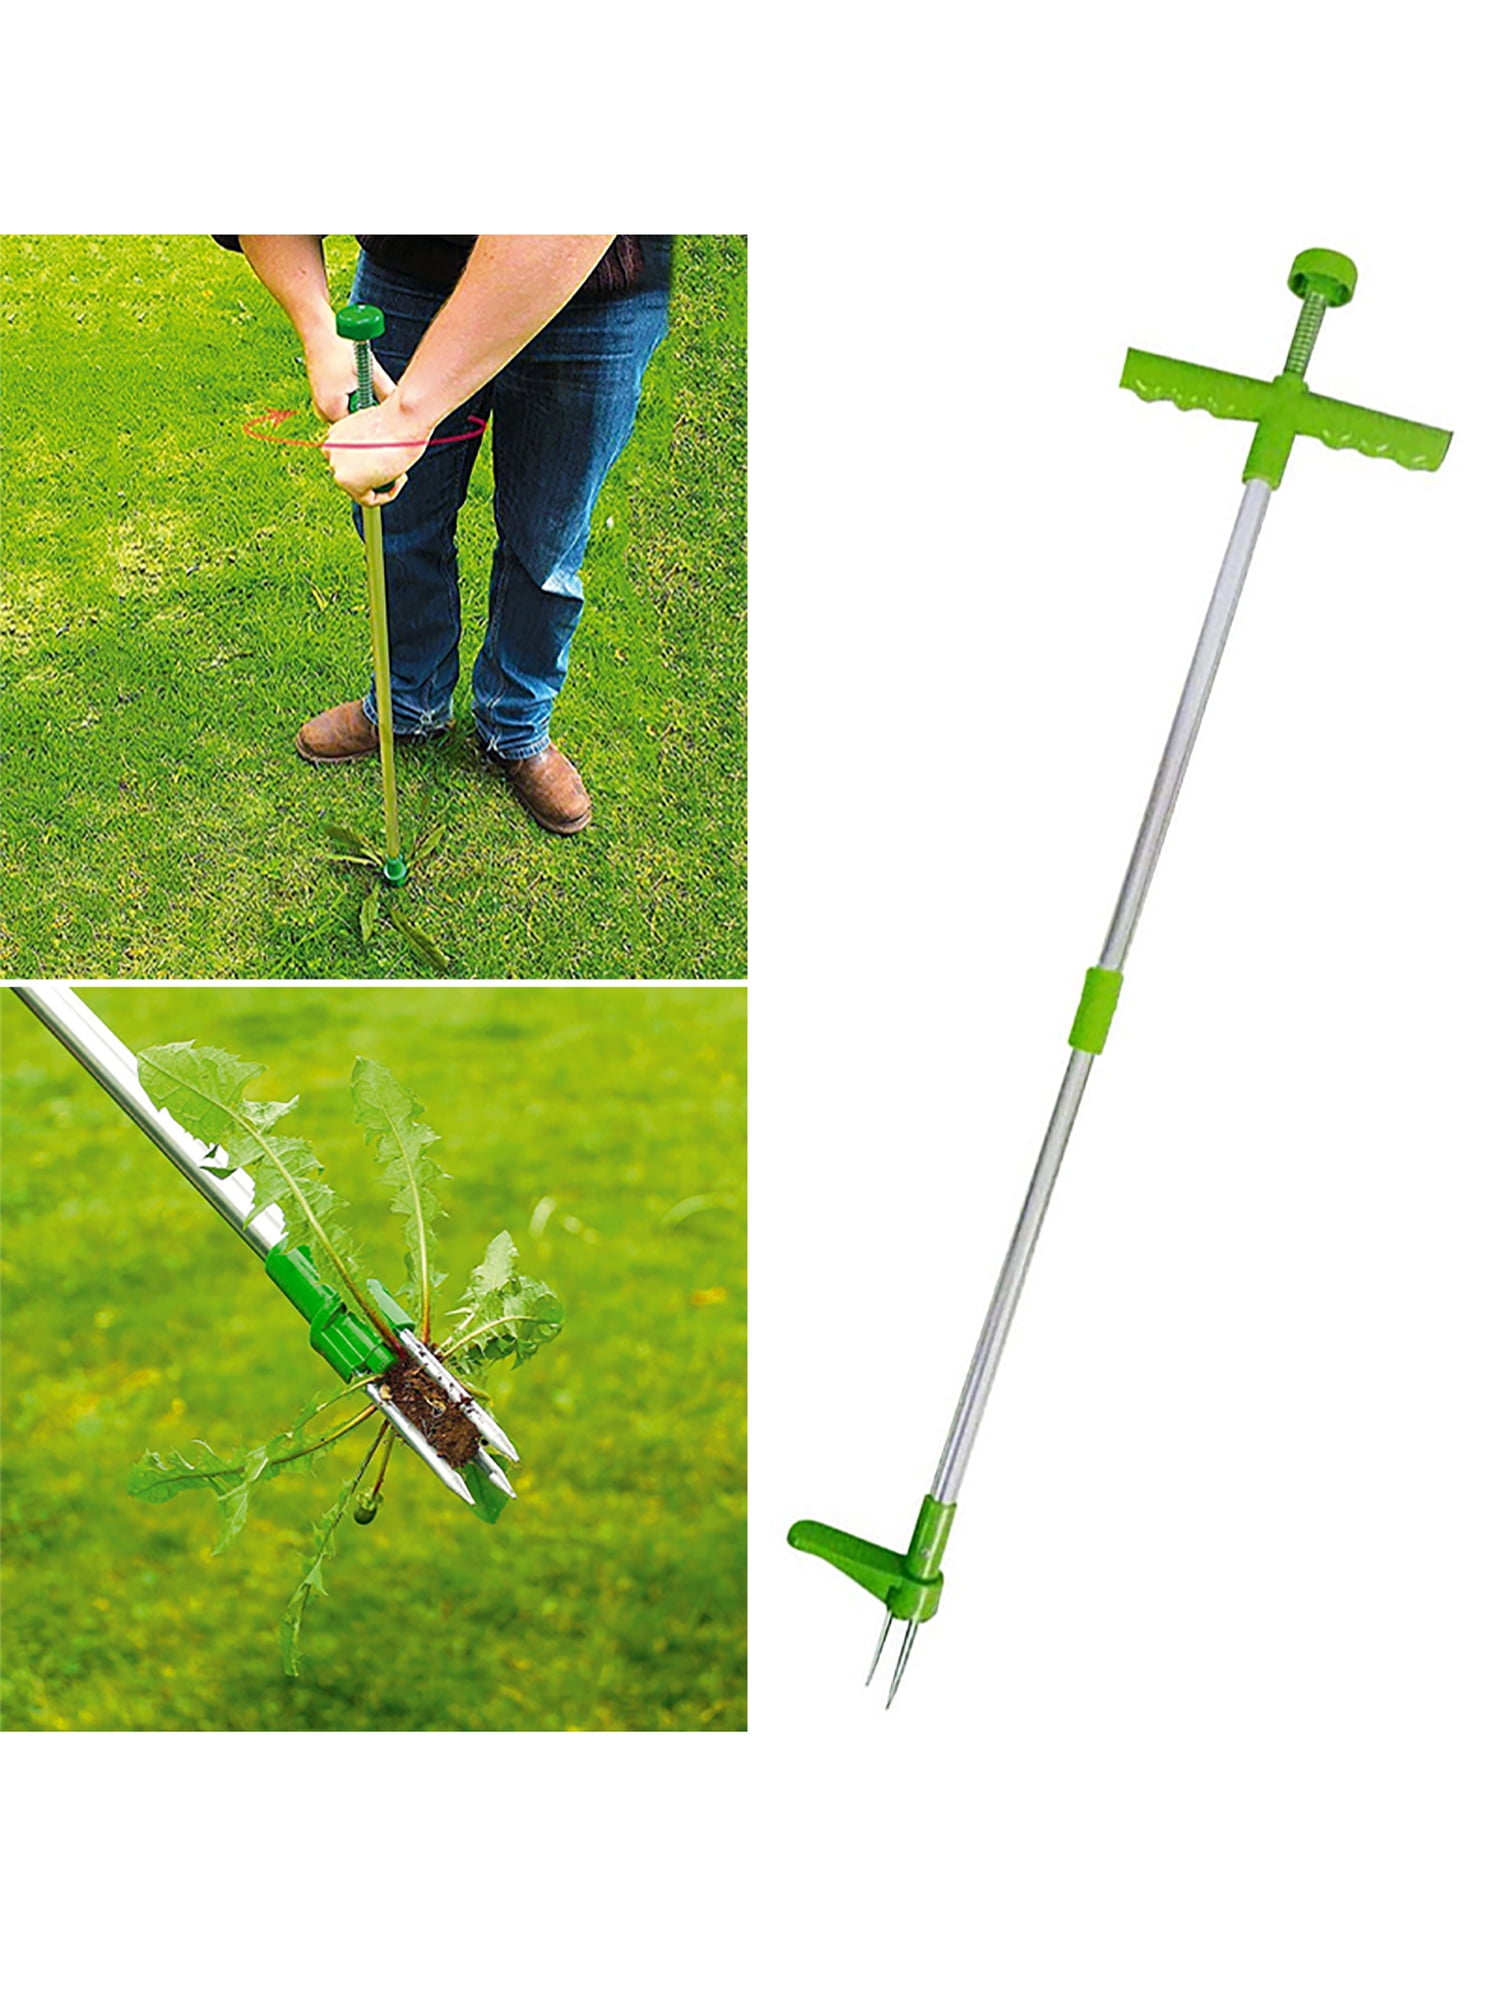 2021 Stand Up Weeder Weed Puller Twister Root Removal Hand Tool Garden 3 Claws 